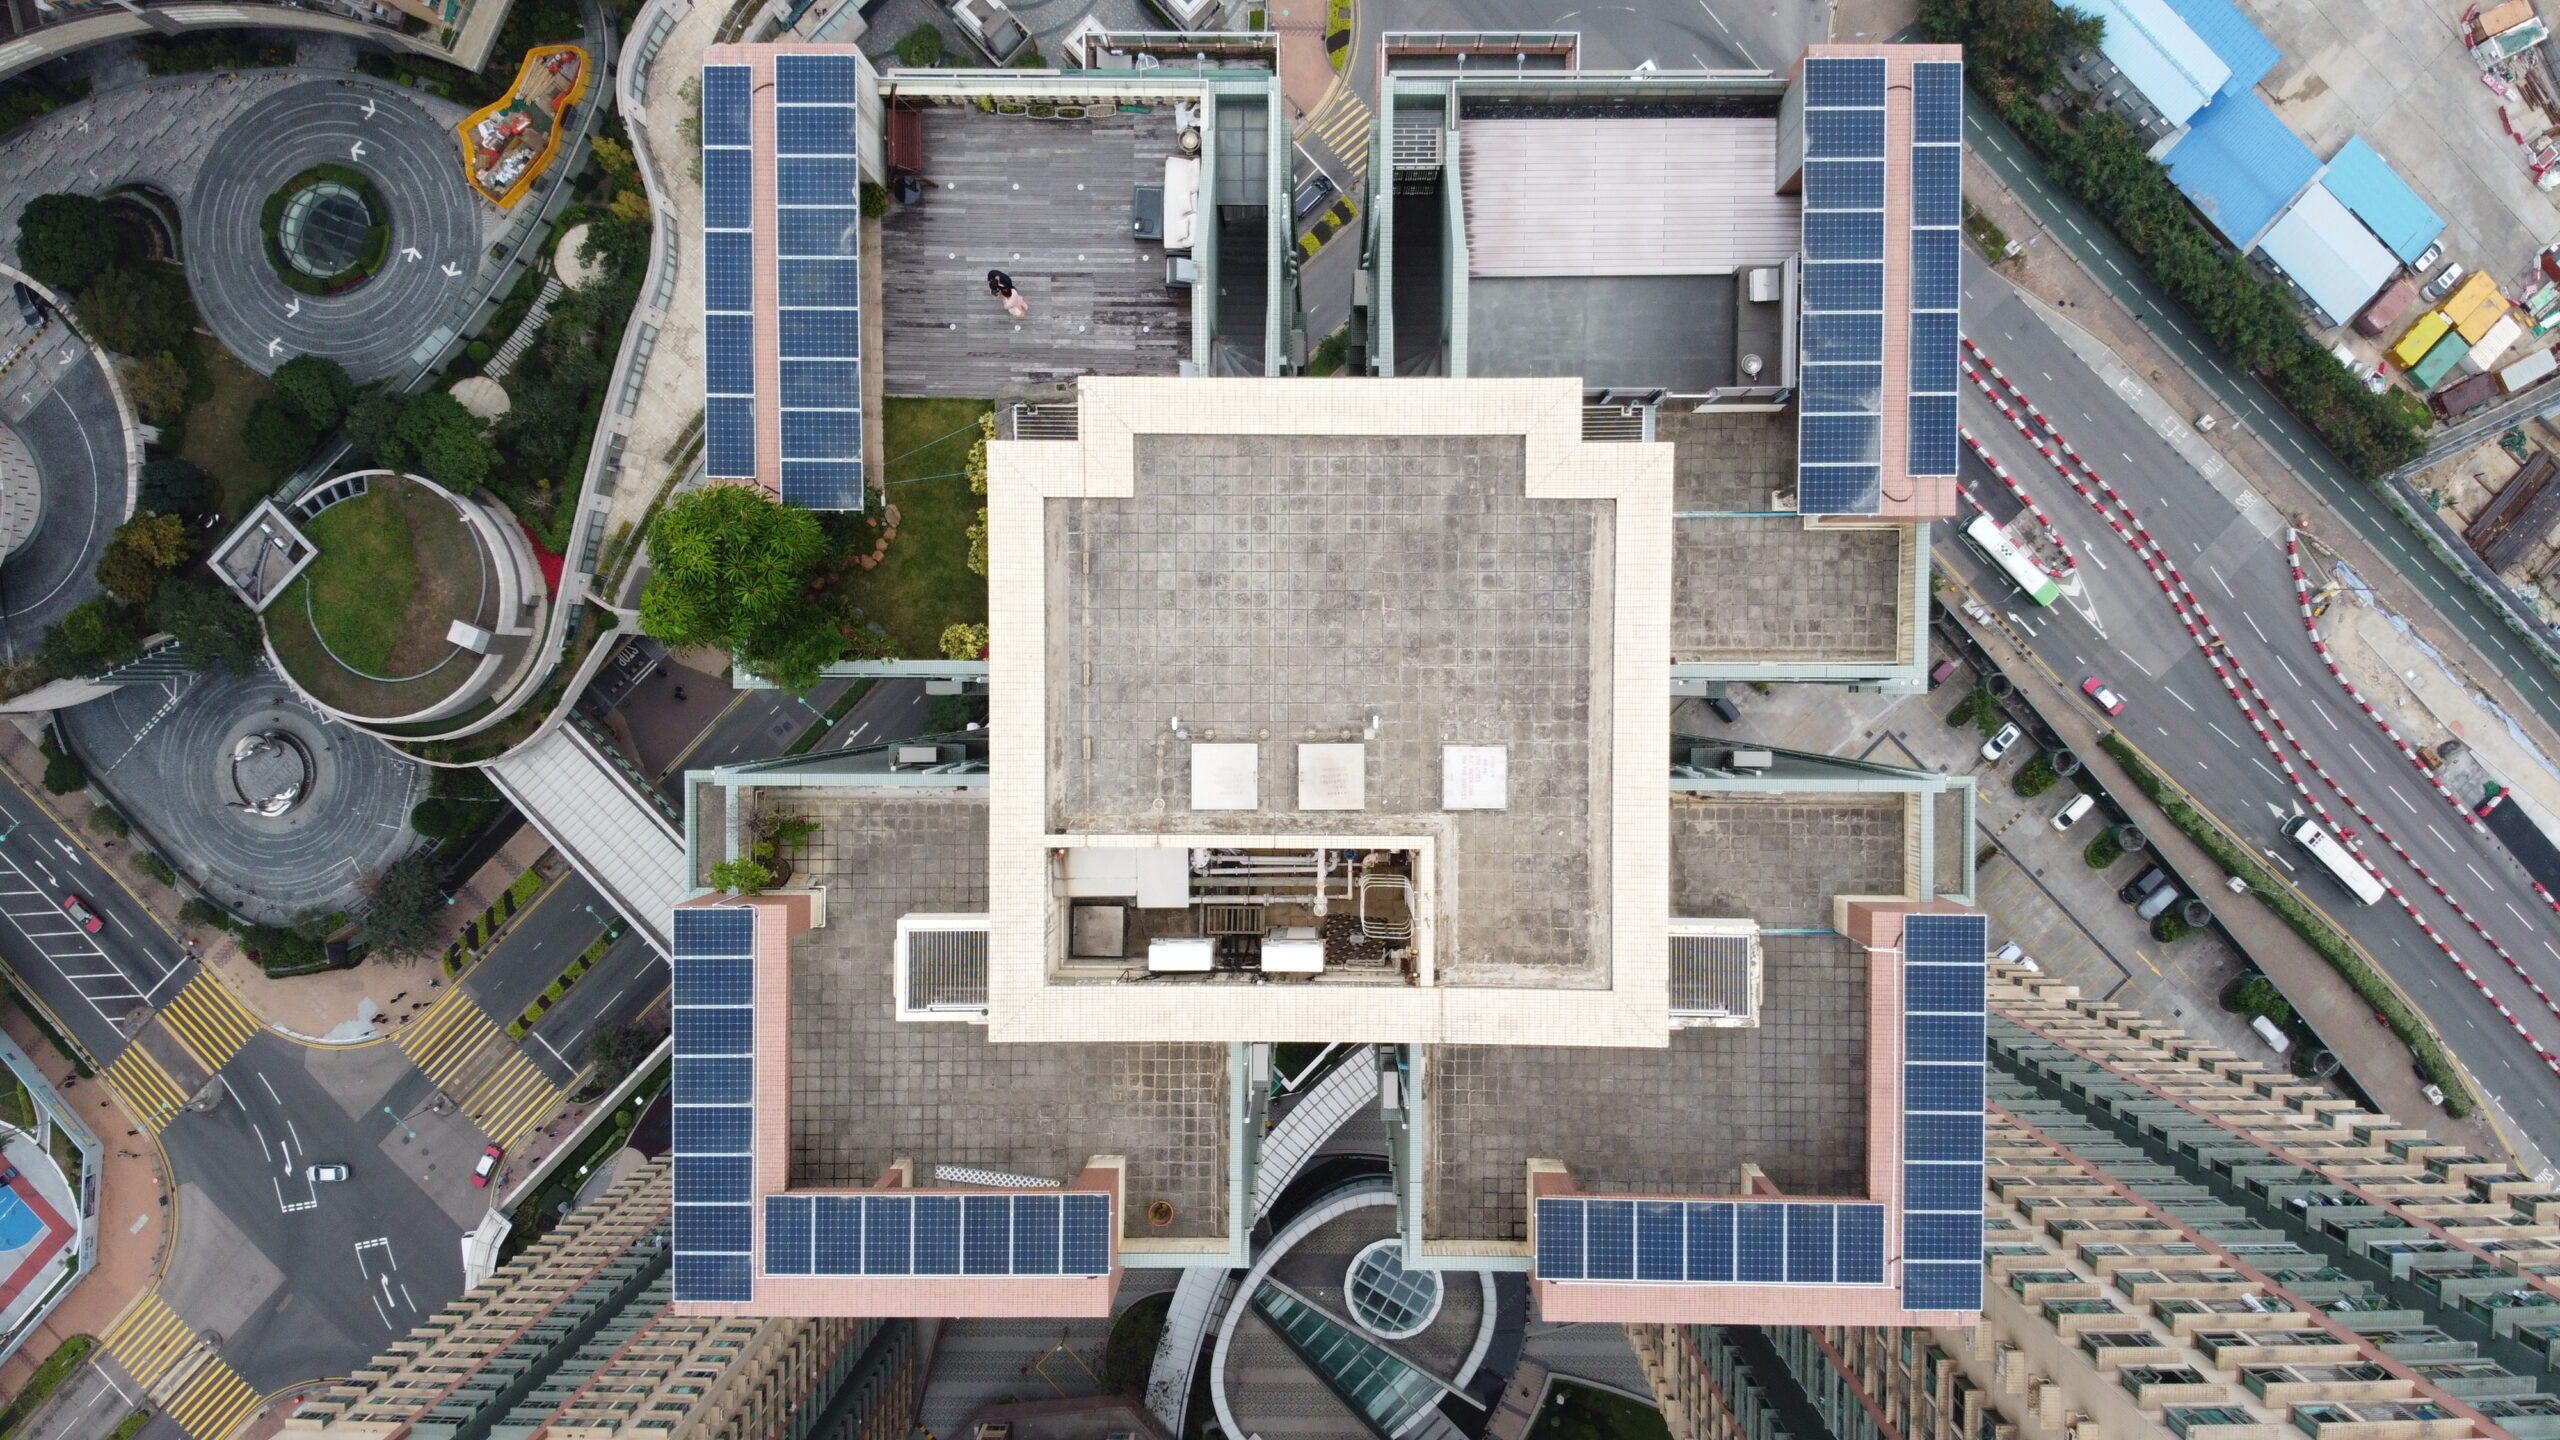 The 20 kW solar system in the 55th floor in Tseung Kwan O